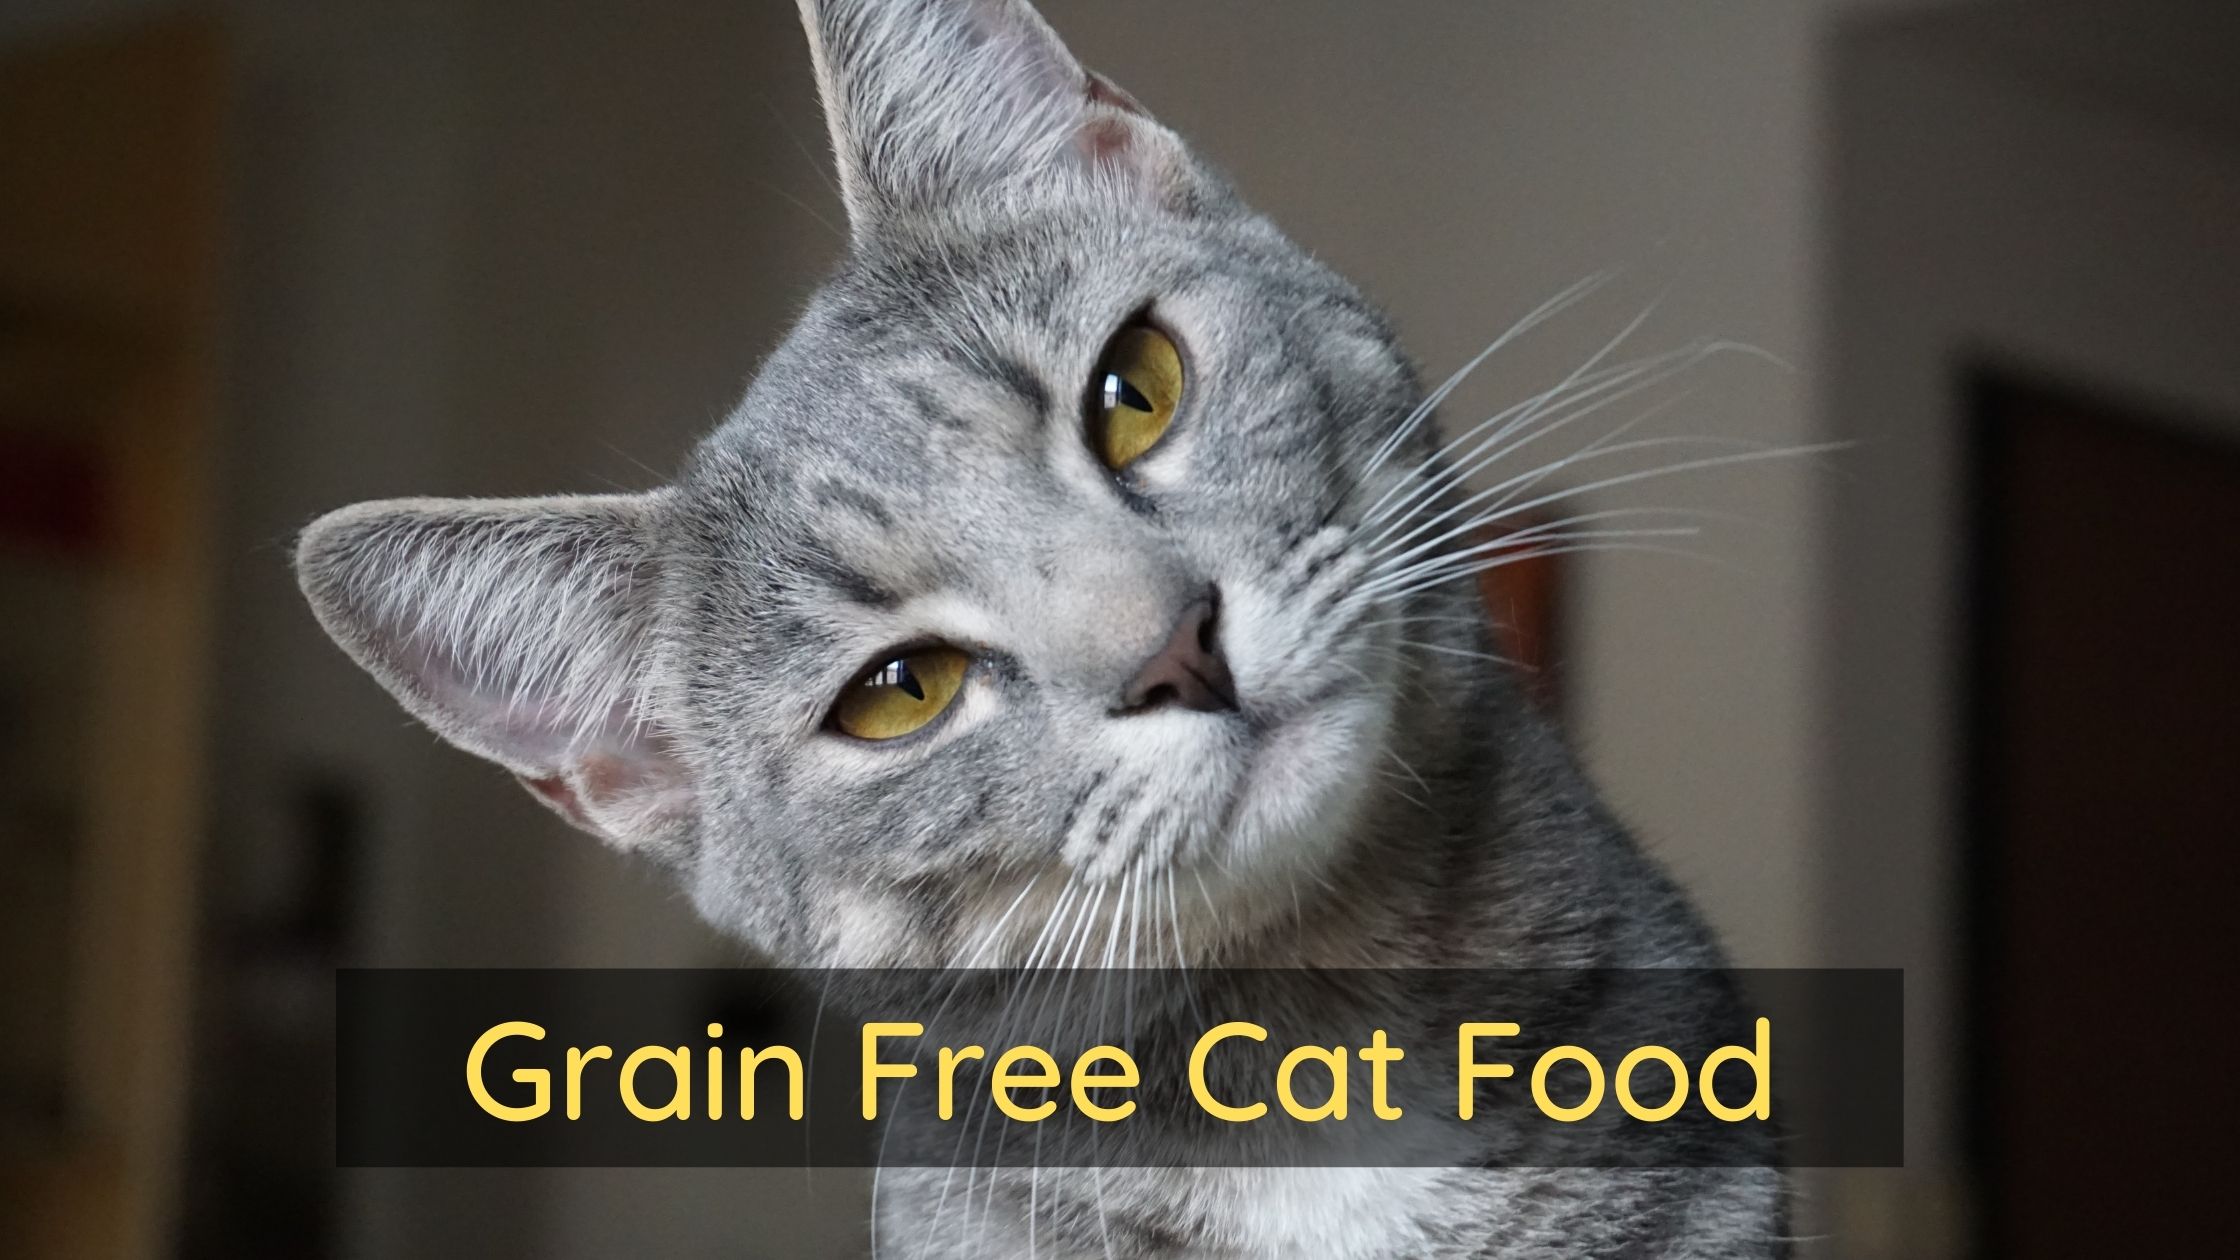 is grain free cat food bad for cats